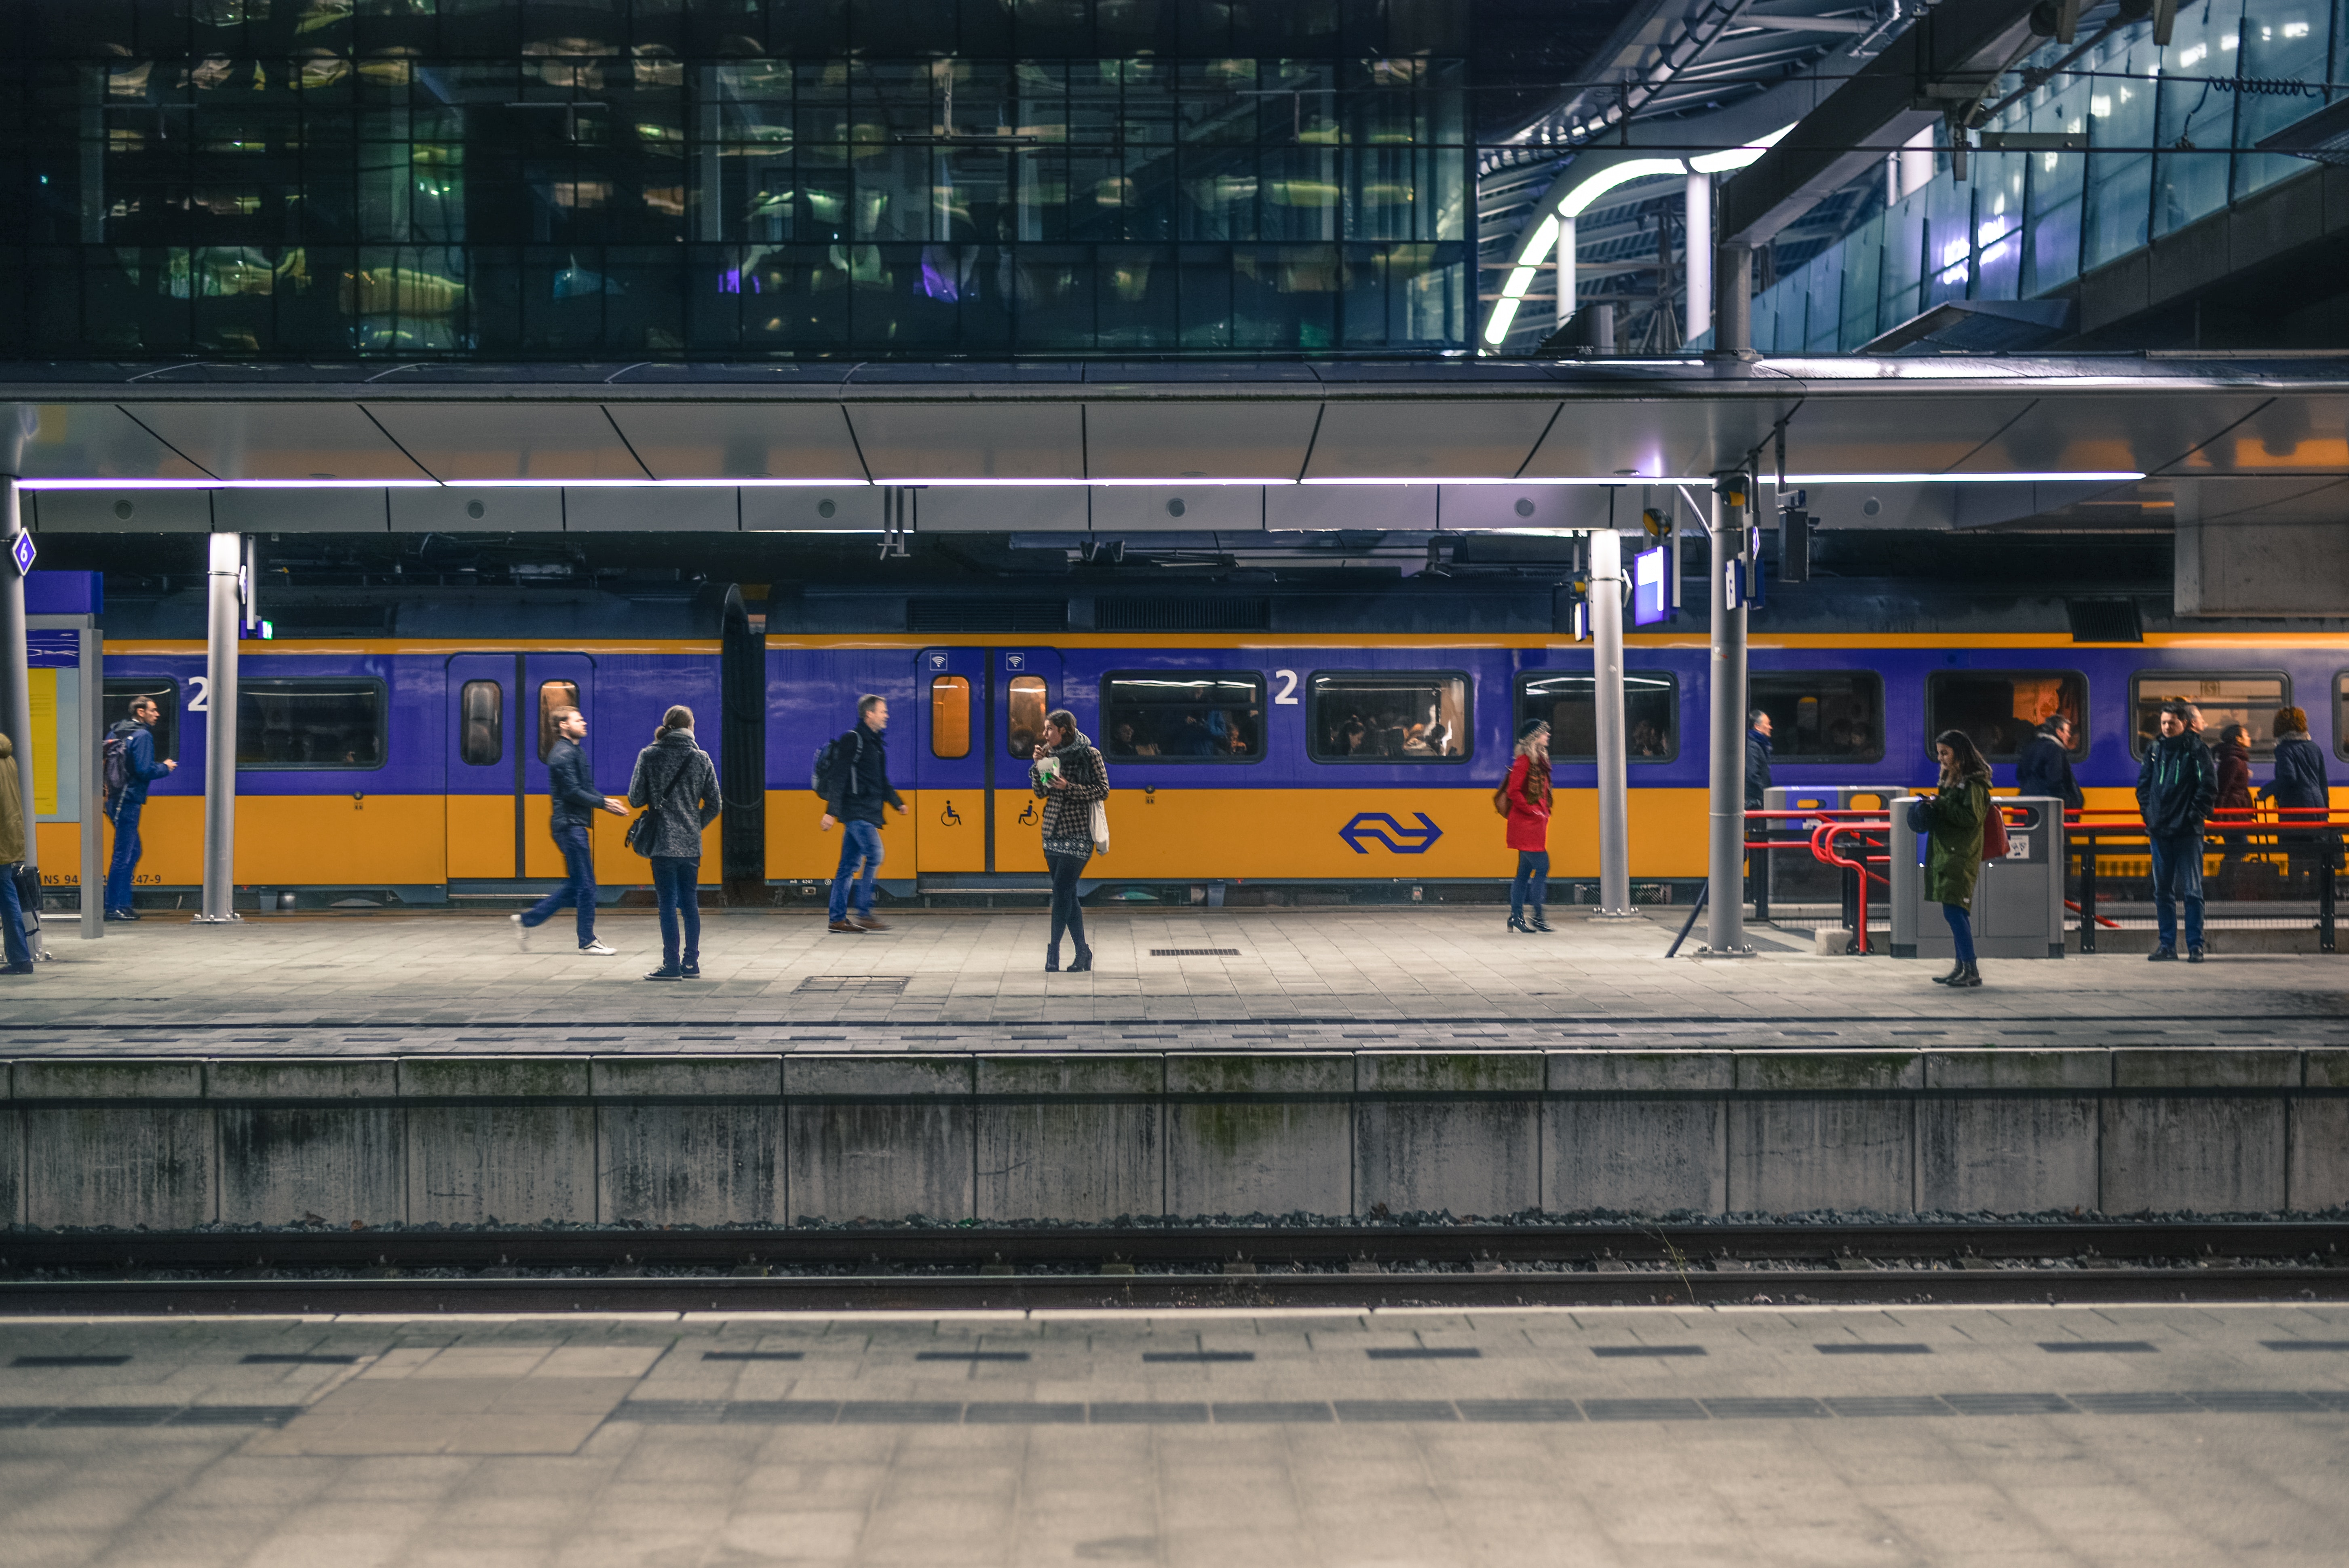 People Standing Near Train Under Shed, Building, Tracks, Railway station, Reflections, HQ Photo